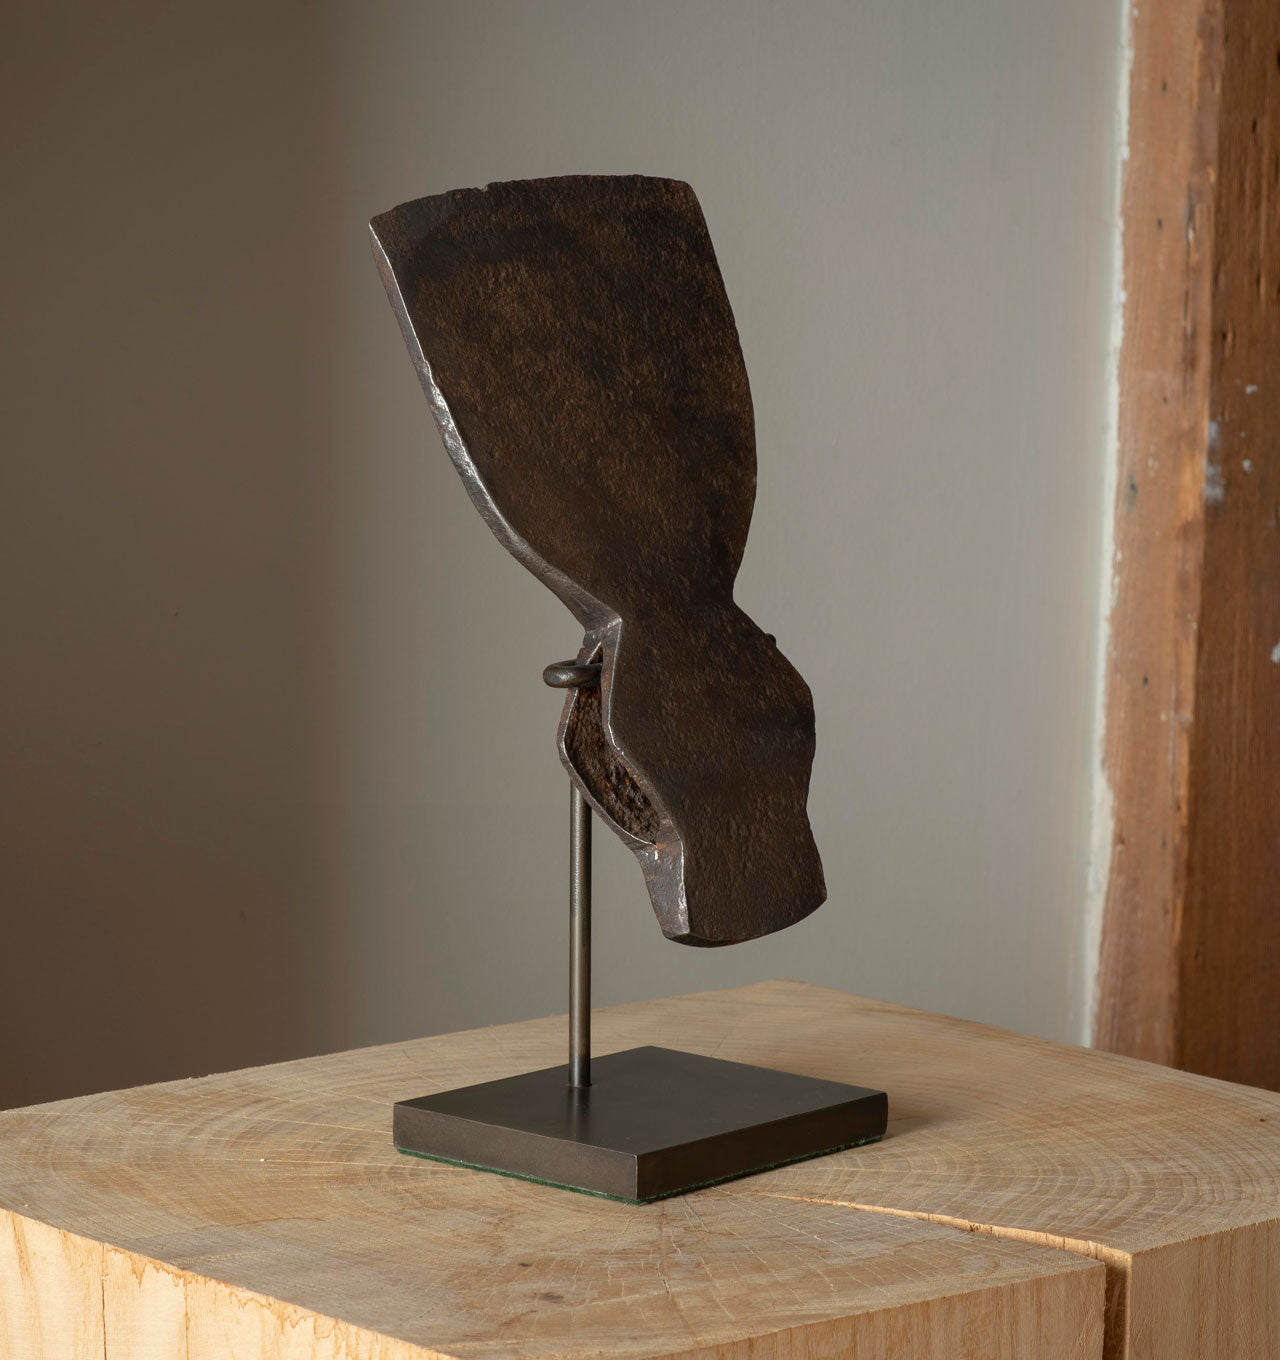 Broad Axe Head on Stand